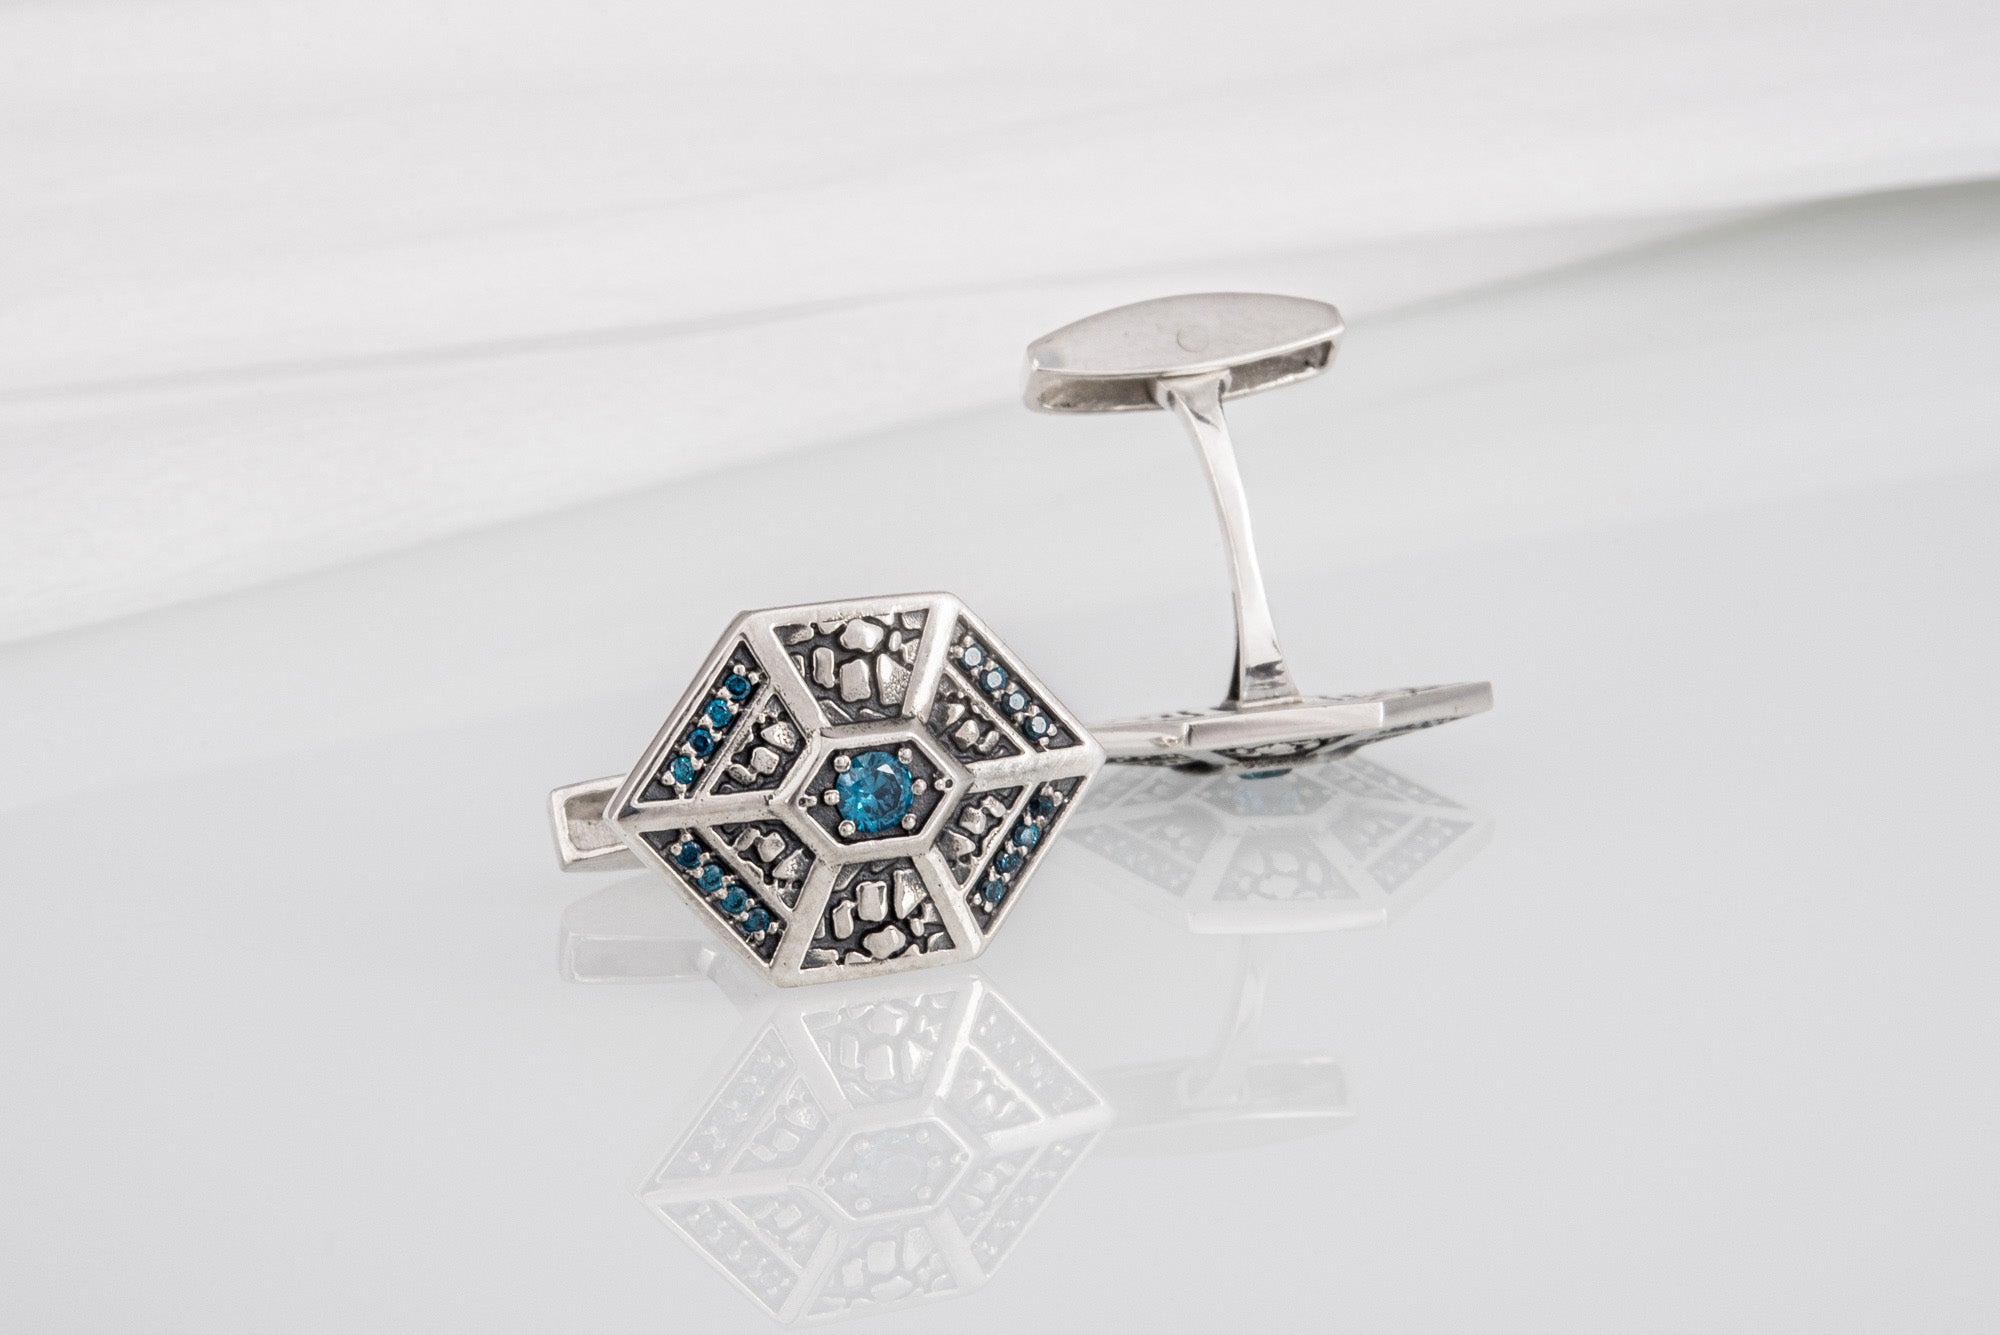 Unique Fashion Cufflinks with gems, handmade sterling silver jewelry